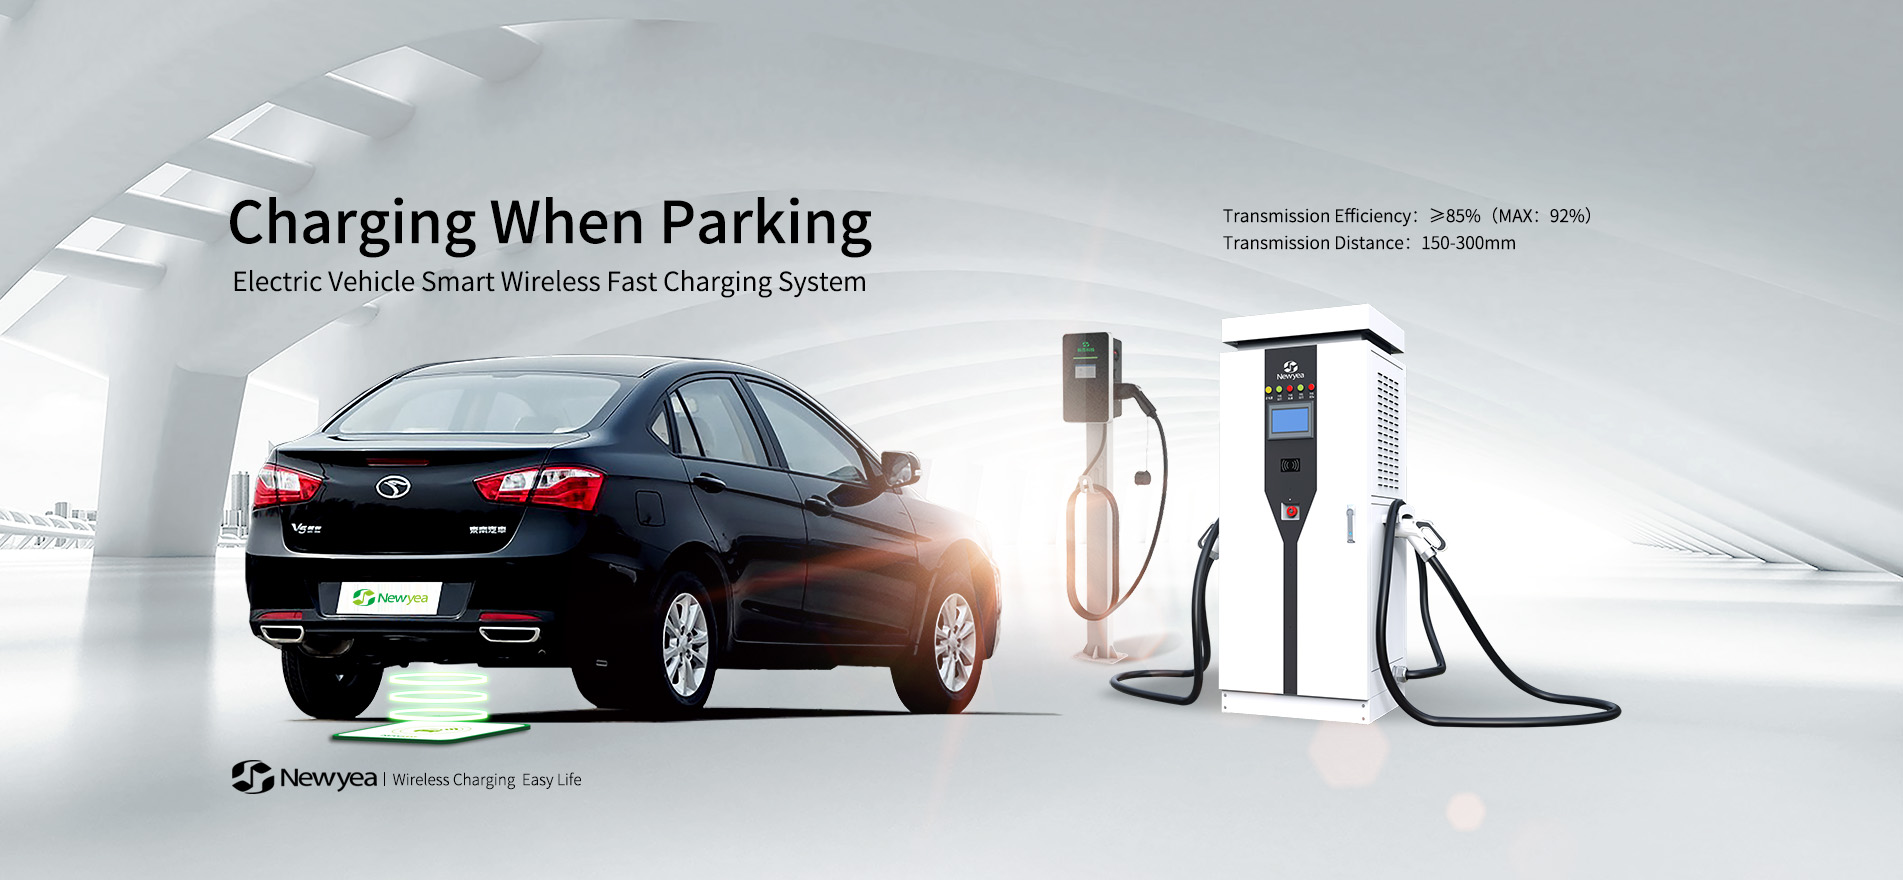 Electric Vehicle Smart Wireless Fast Charging System